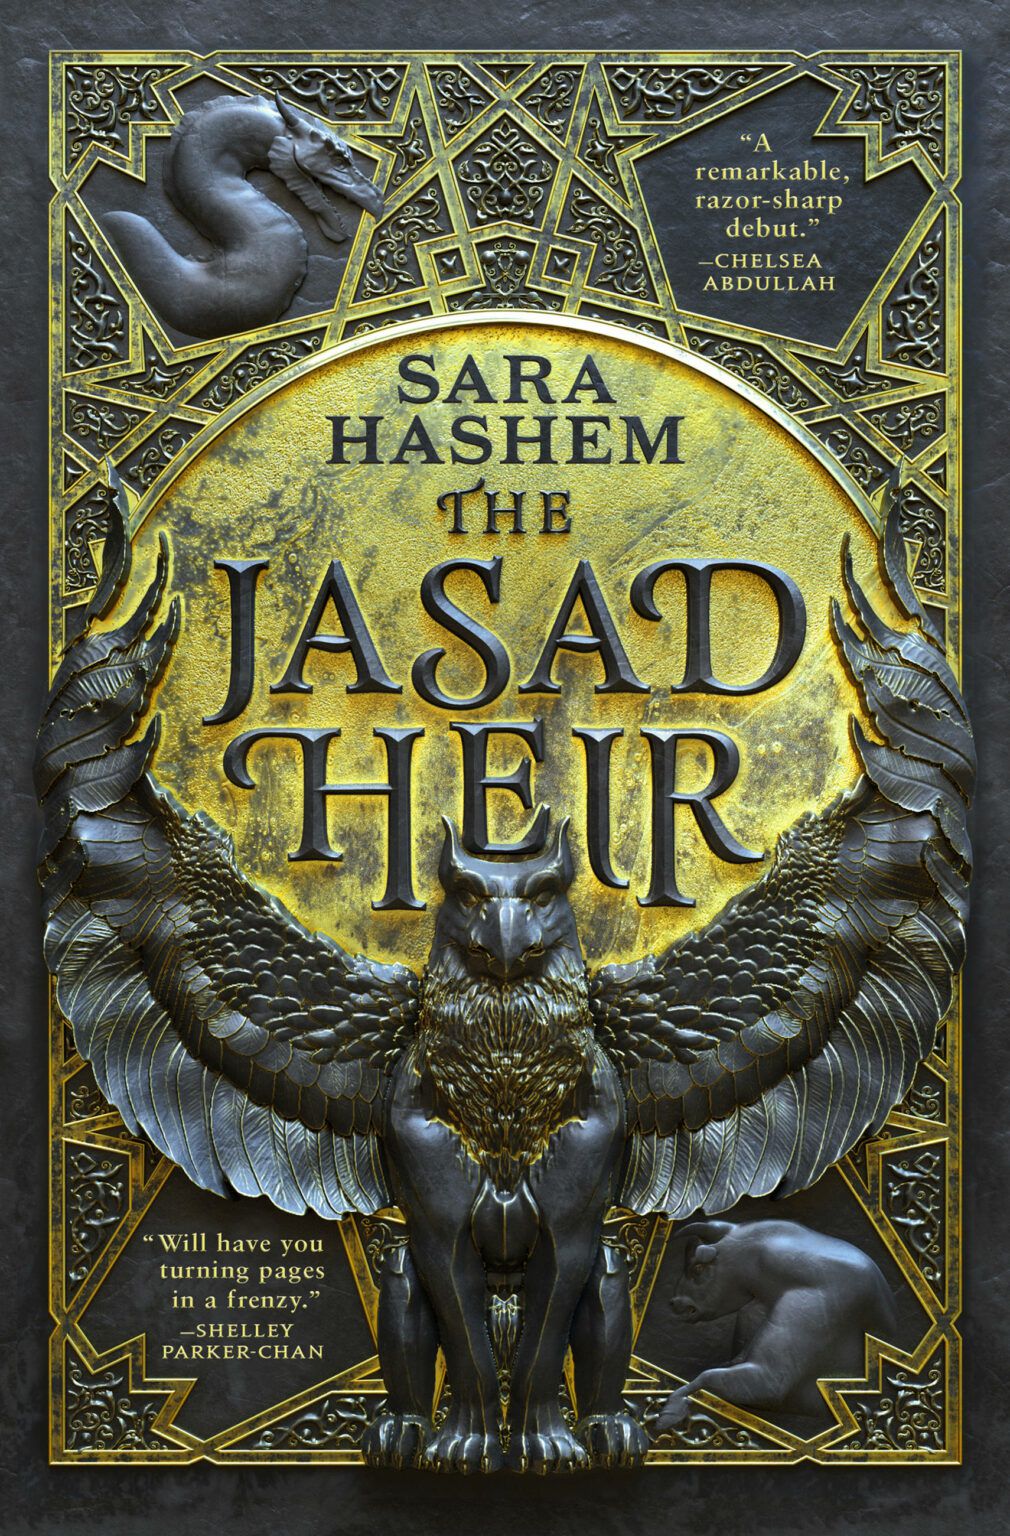 Cover image for Sara Hashem’s The Jasad Heir, featuring what looks like statues of a snake,, a bull, and a griffin.